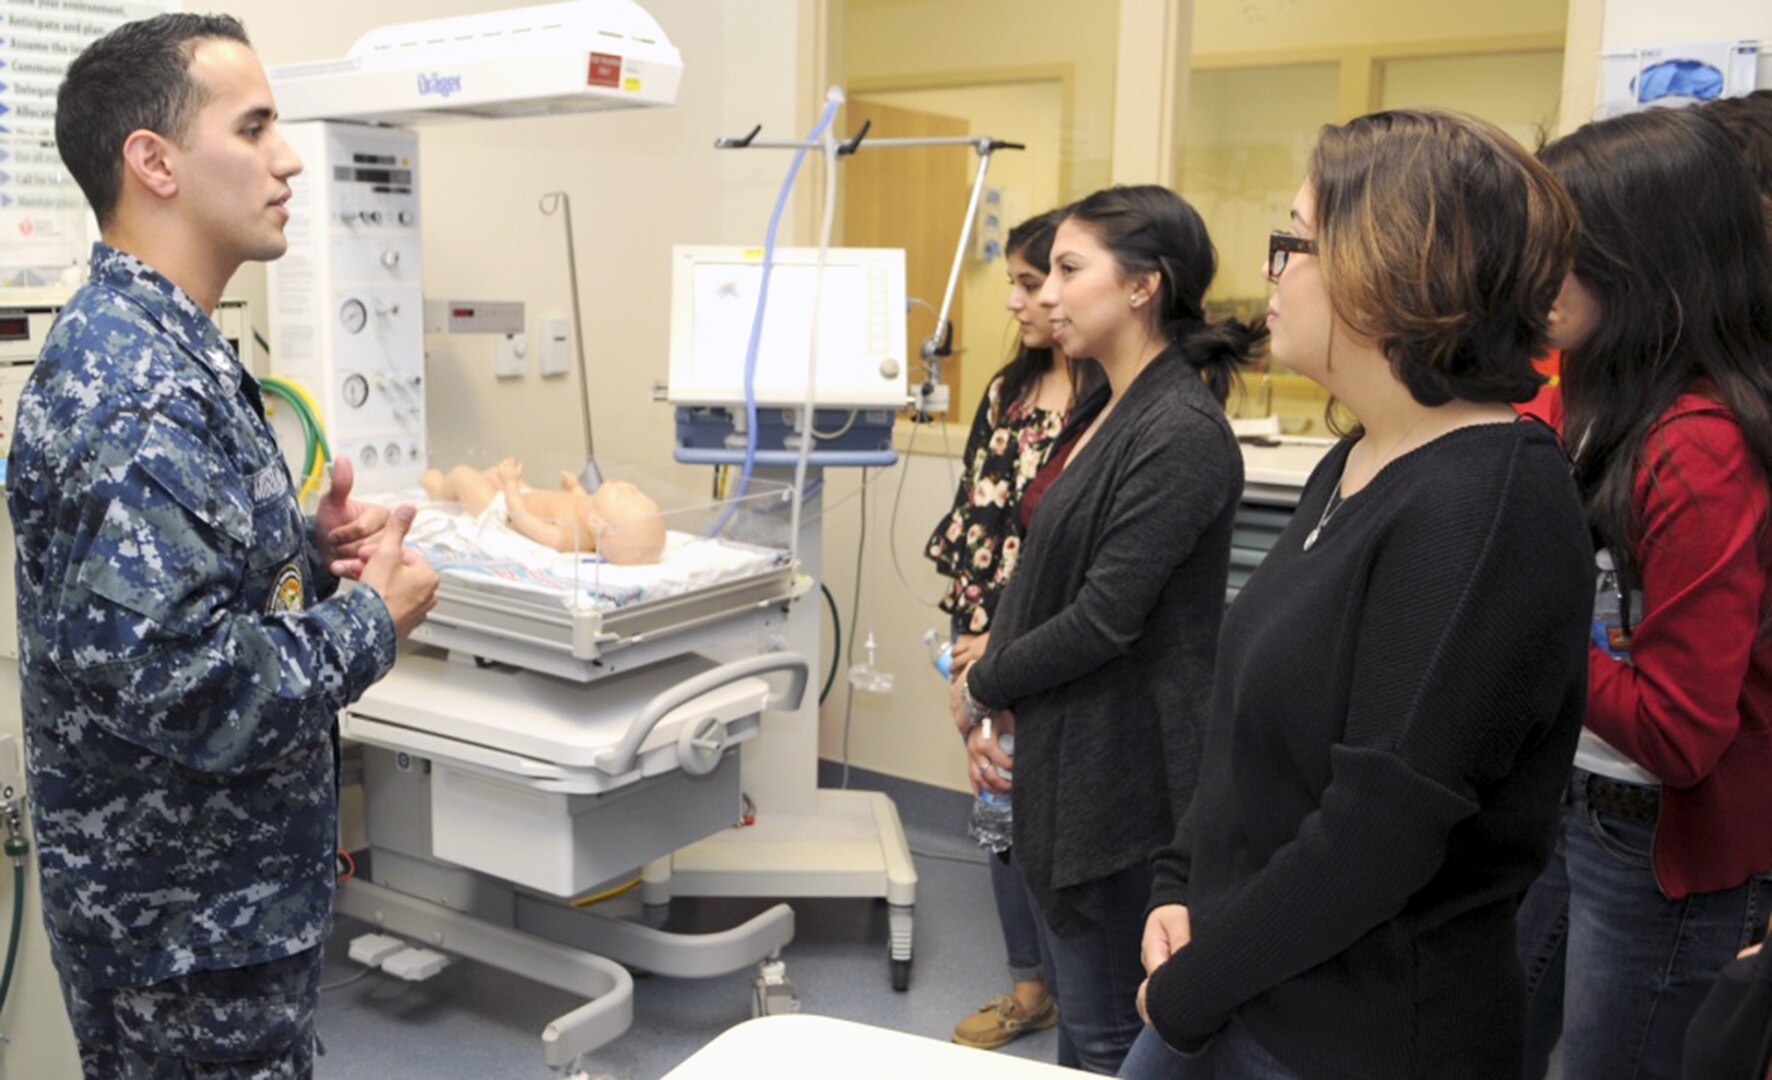 Petty Officer 2nd Class Christian Miranda, a respiratory therapist instructor at the Medical Education and Training Campus, talks to students from John Marshall High School about respiratory therapists' job in newborn intensive care units during a tour of METC at Joint Base San Antonio-Fort Sam Houston March 2. The tour was conducted by METC's Navy service component, Navy Medicine Training Support Center, as part of their Science, Technology, Engineering and Mathematics, or STEM, efforts.